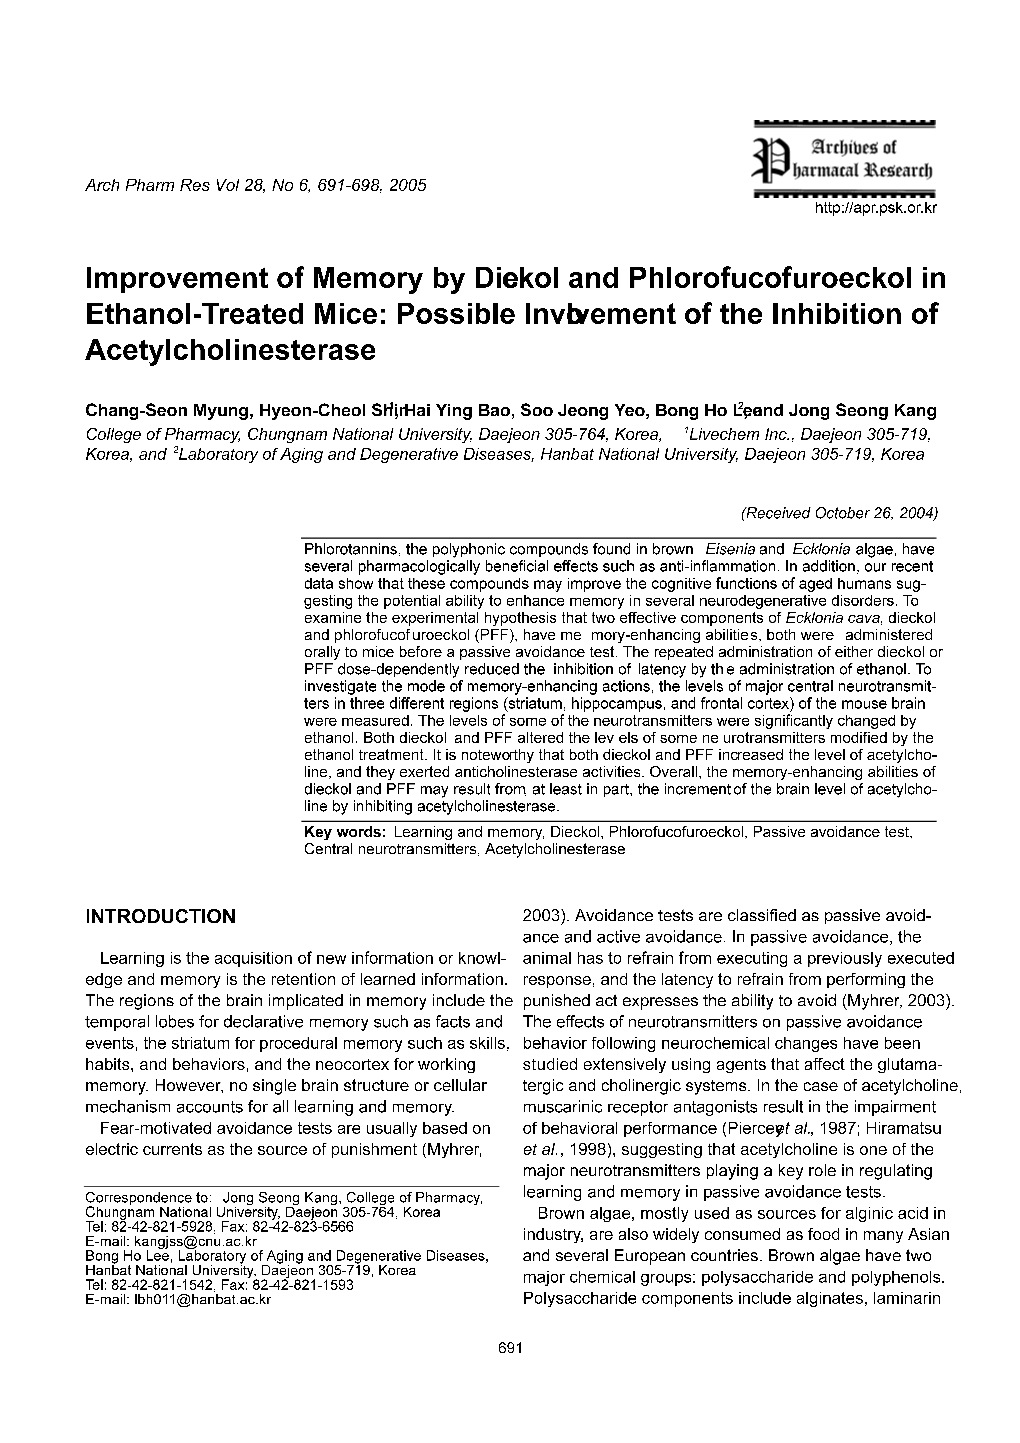 Improvement of Memory by Dieckol and Phlorofucofuroeckol in Ethanol-Treated Mice: Possible Involvement of the Inhibition of Acetylcholinesterase